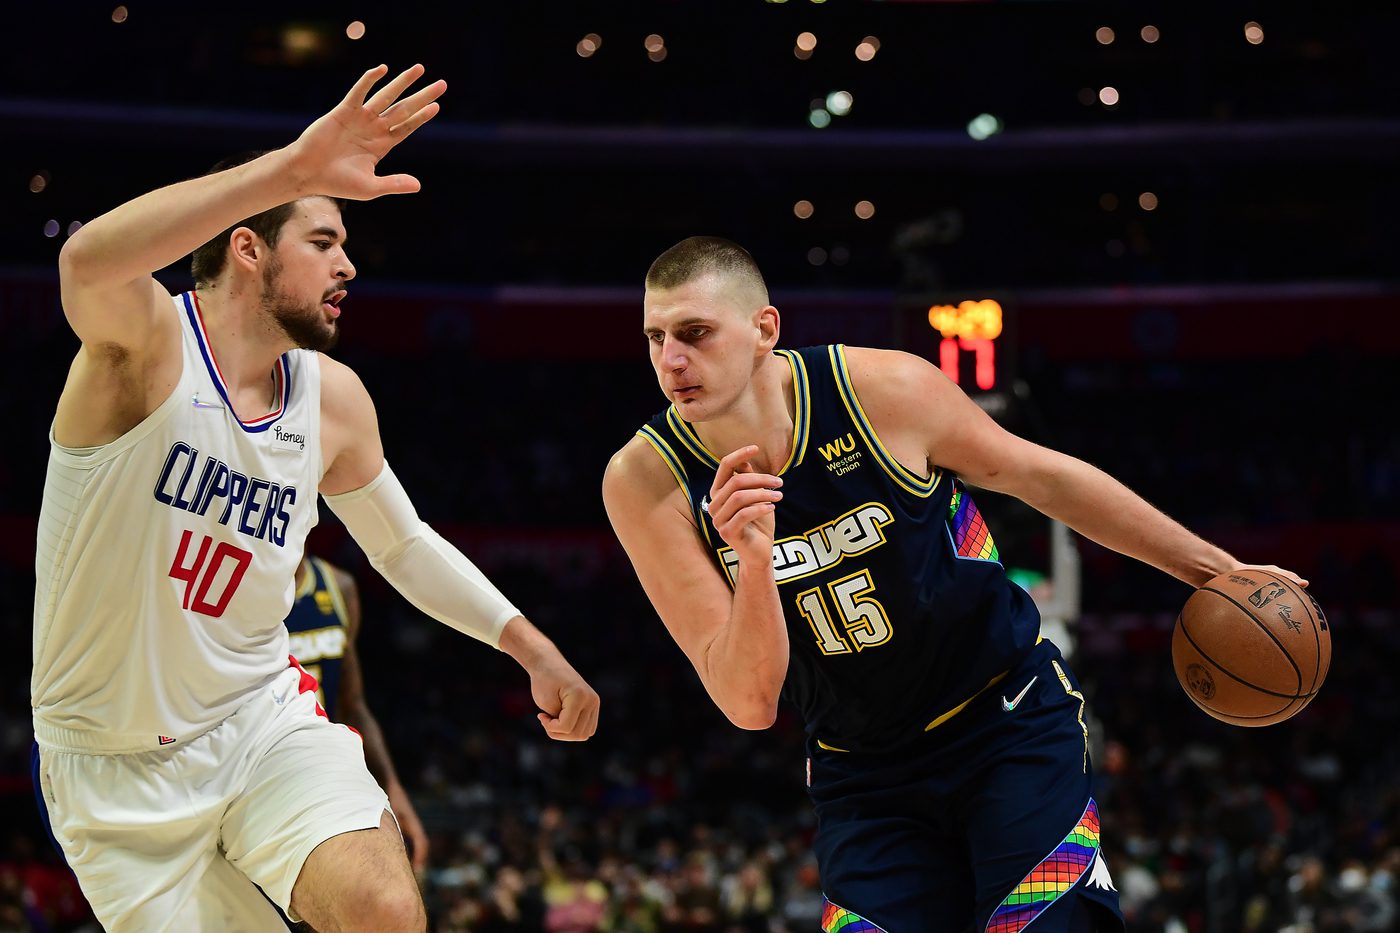 Dec 26, 2021; Los Angeles, California, USA; Denver Nuggets center Nikola Jokic (15) moves to the basket against Los Angeles Clippers center Ivica Zubac (40) during the second half at Crypto.com Arena. Mandatory Credit: Gary A. Vasquez-USA TODAY Sports